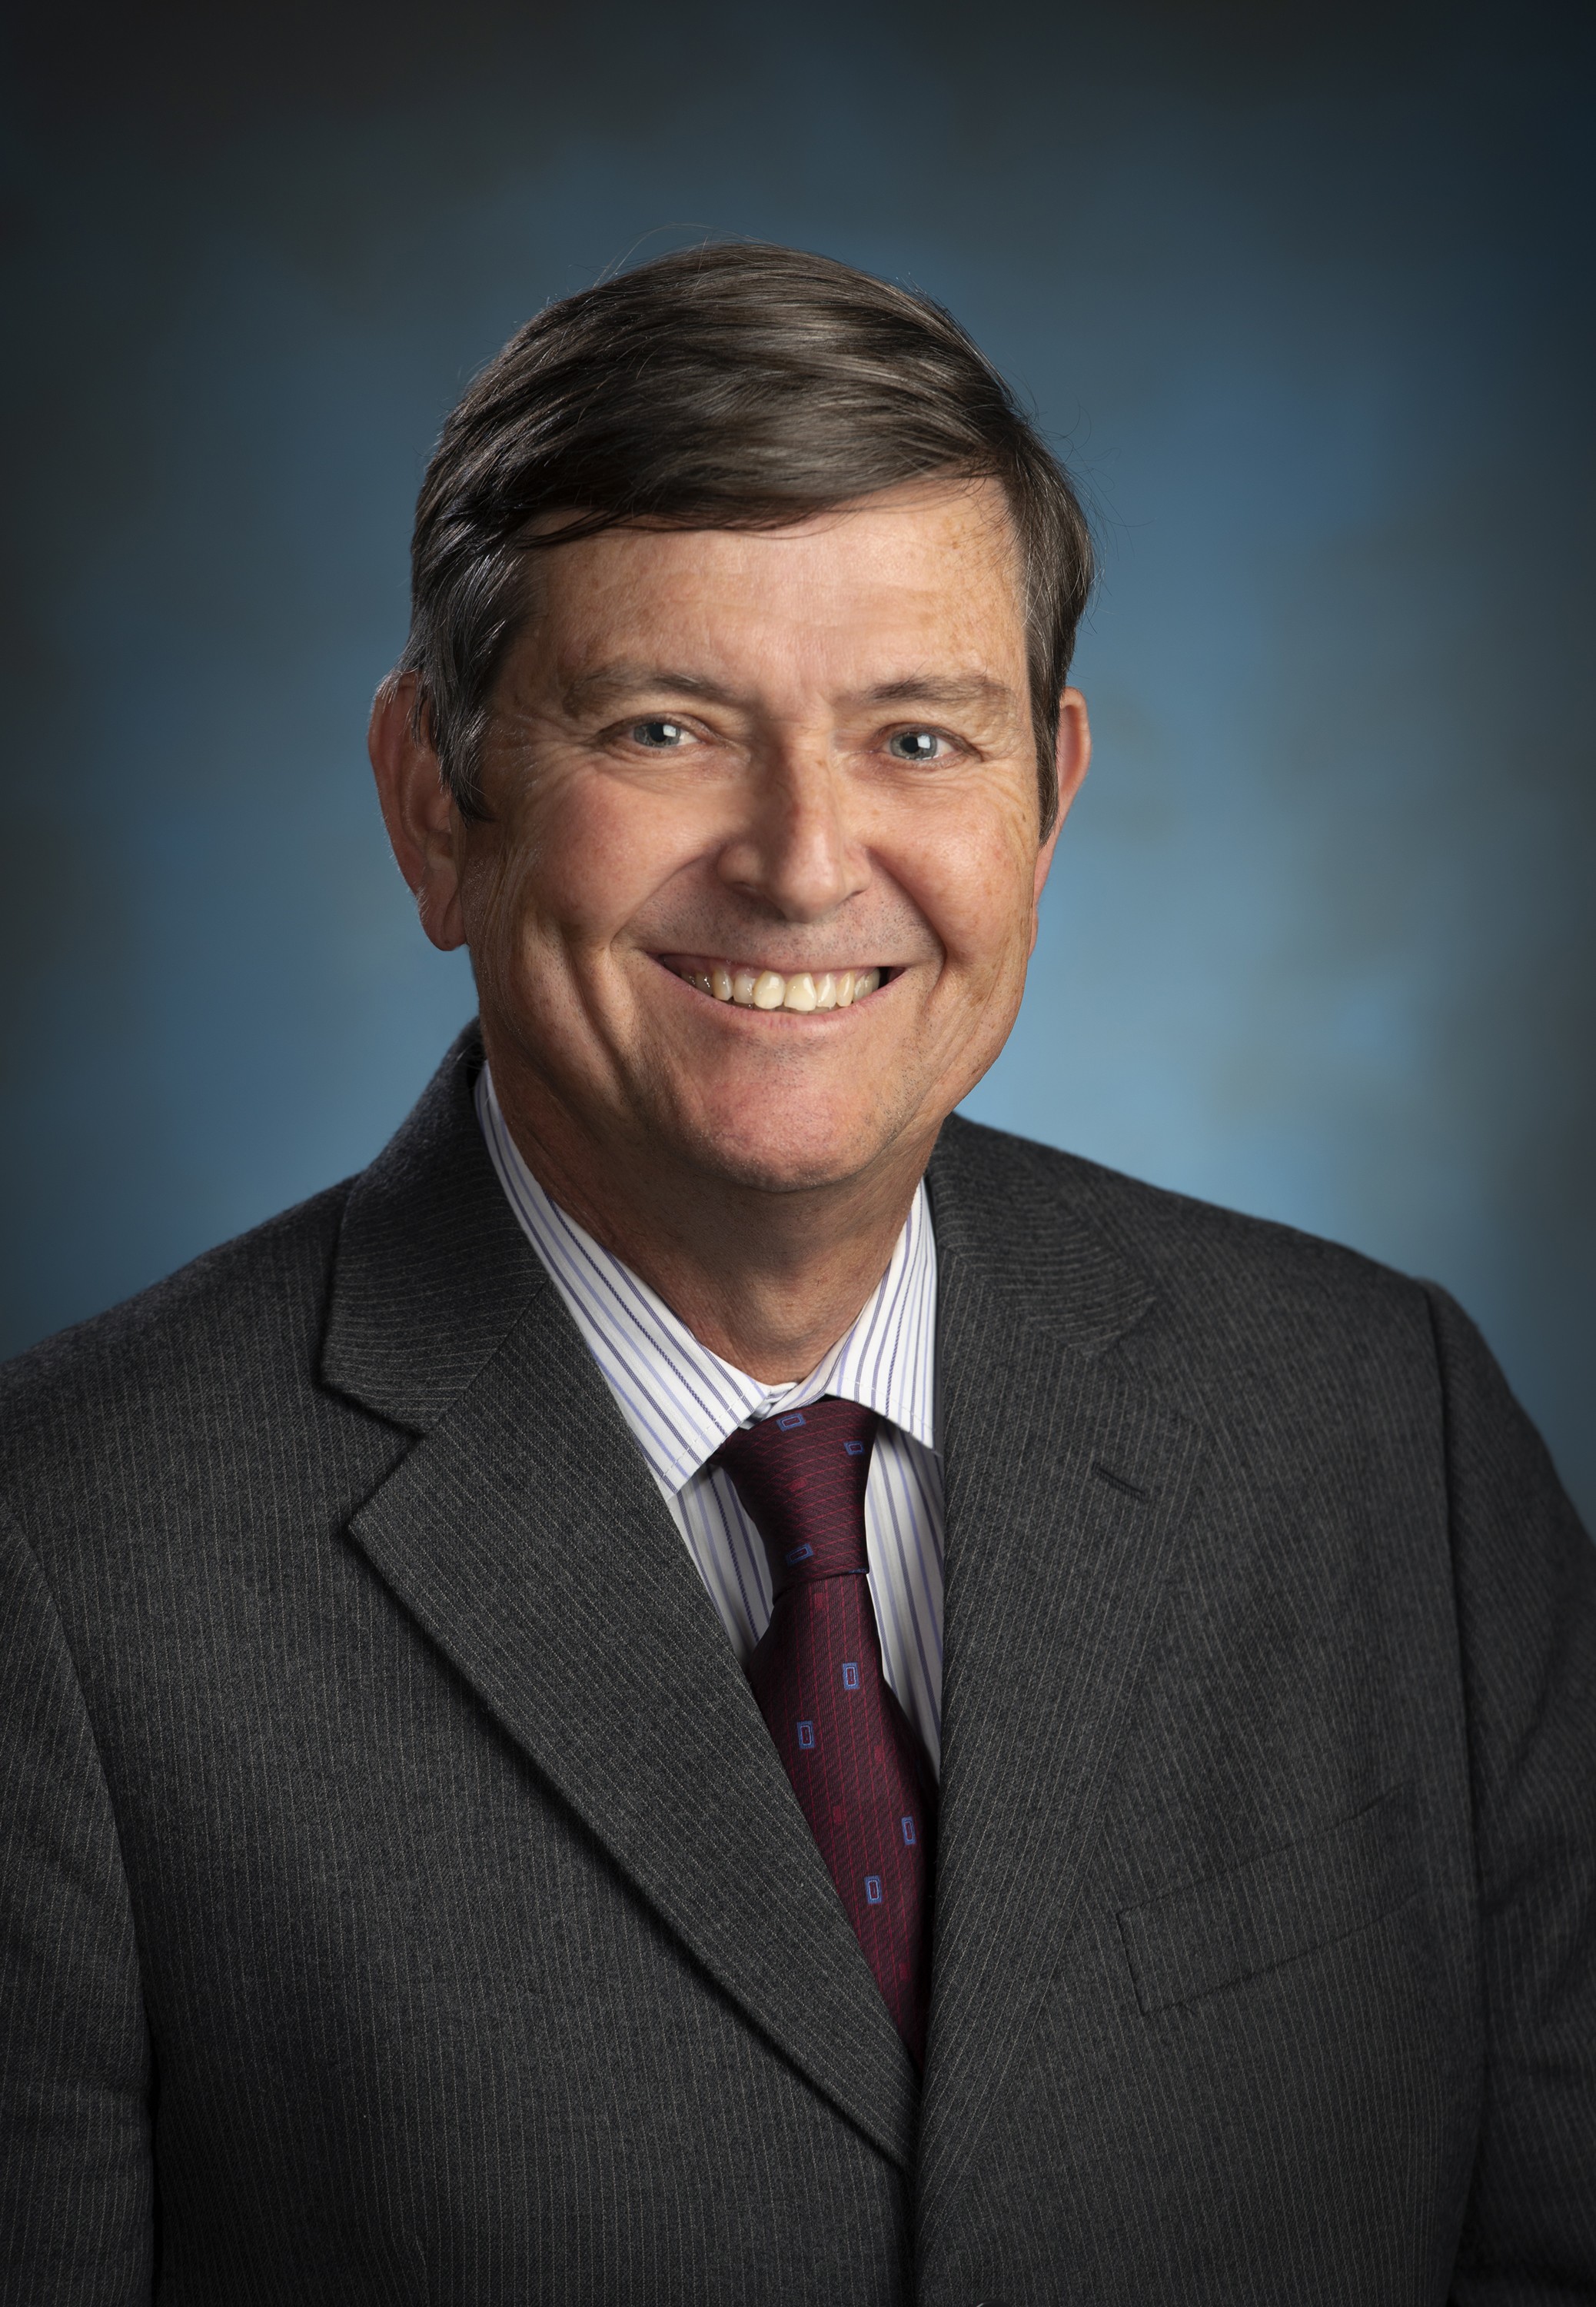 Tom Ruth, president and CEO